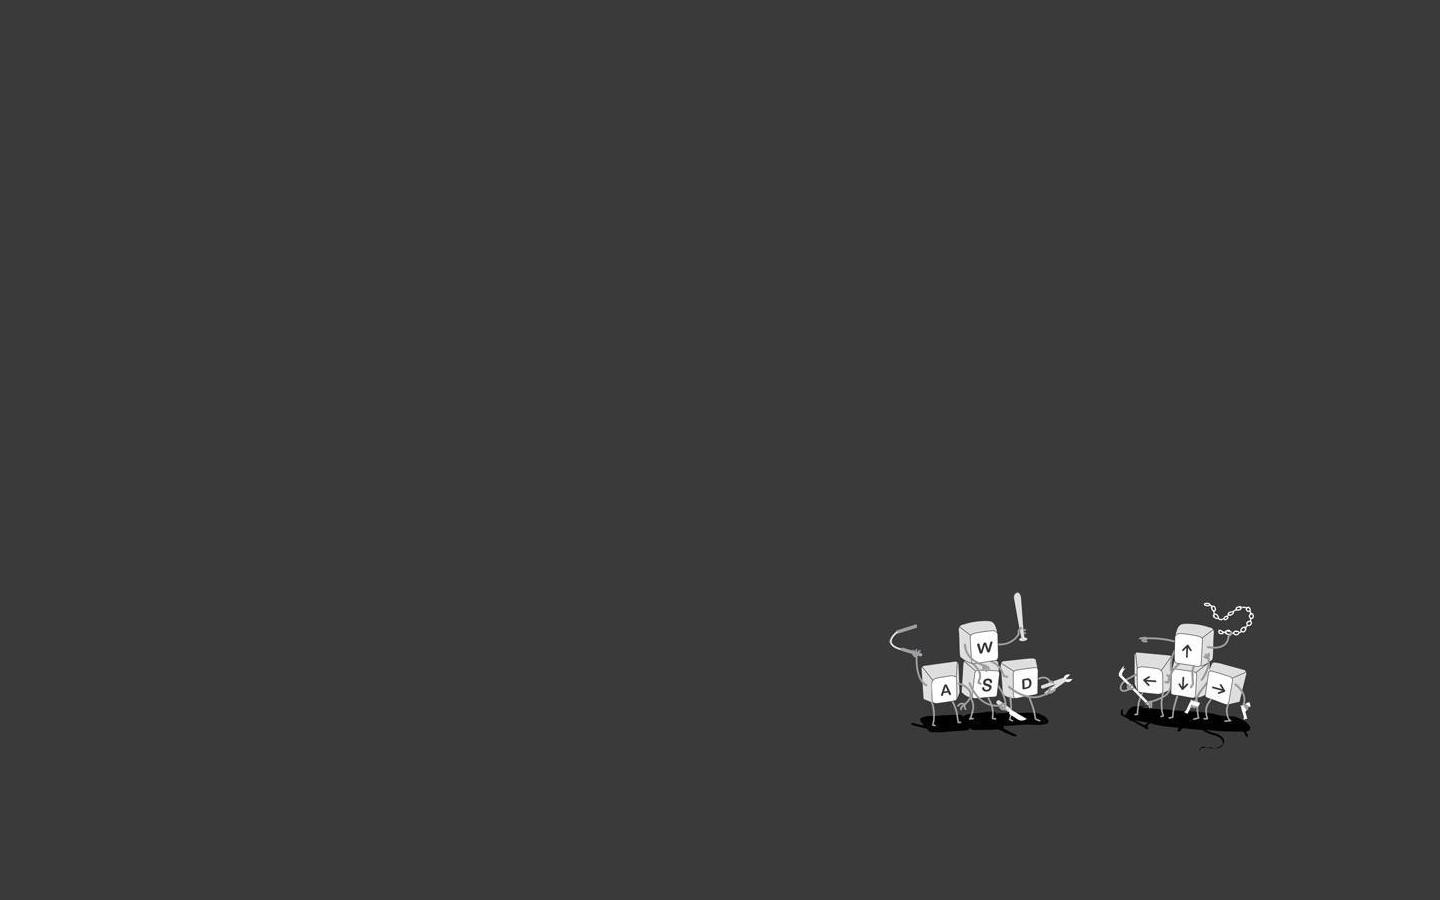 General 1440x900 humor simple background monochrome artwork computer gray background